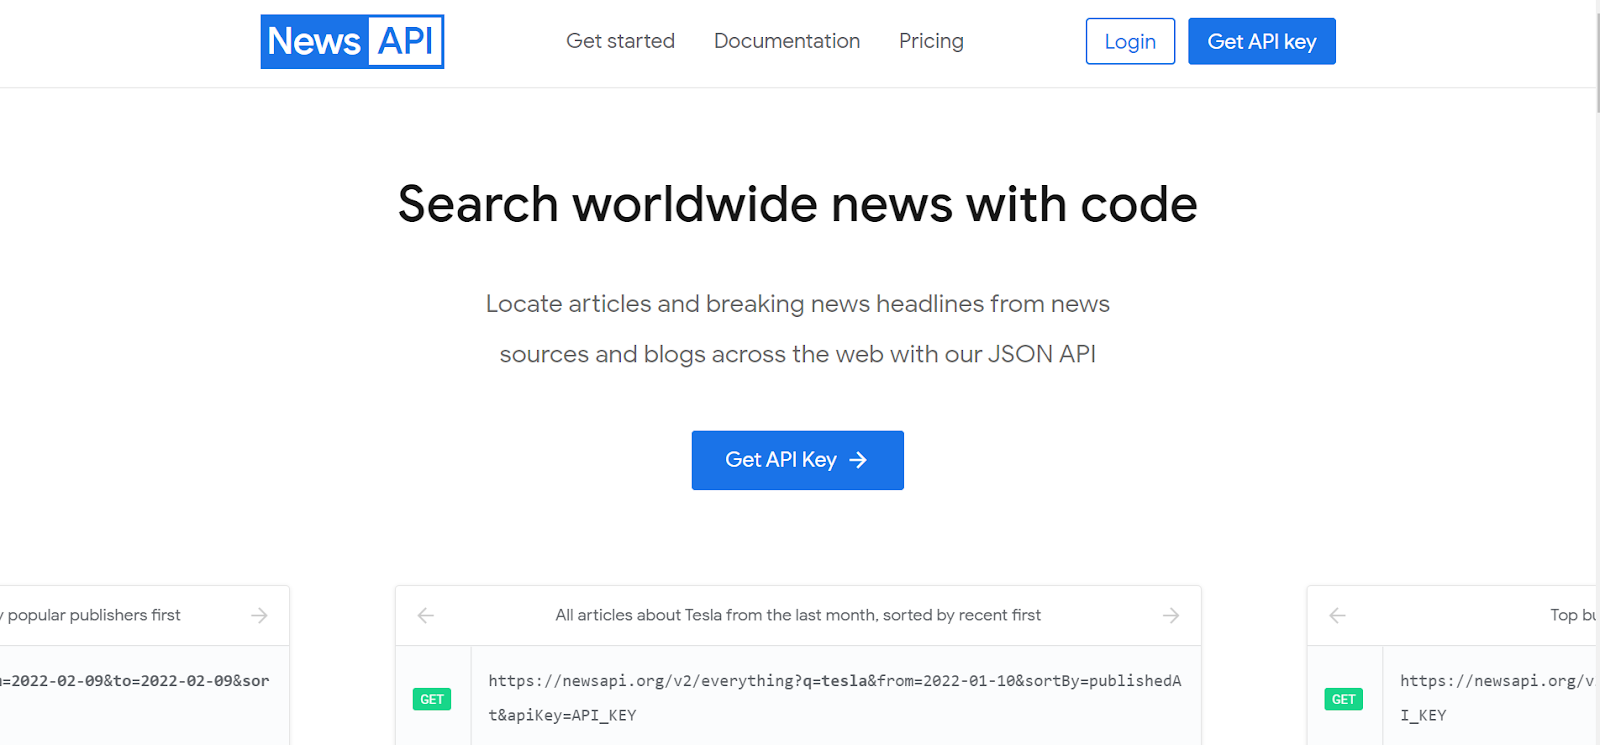 Front page of the News API website